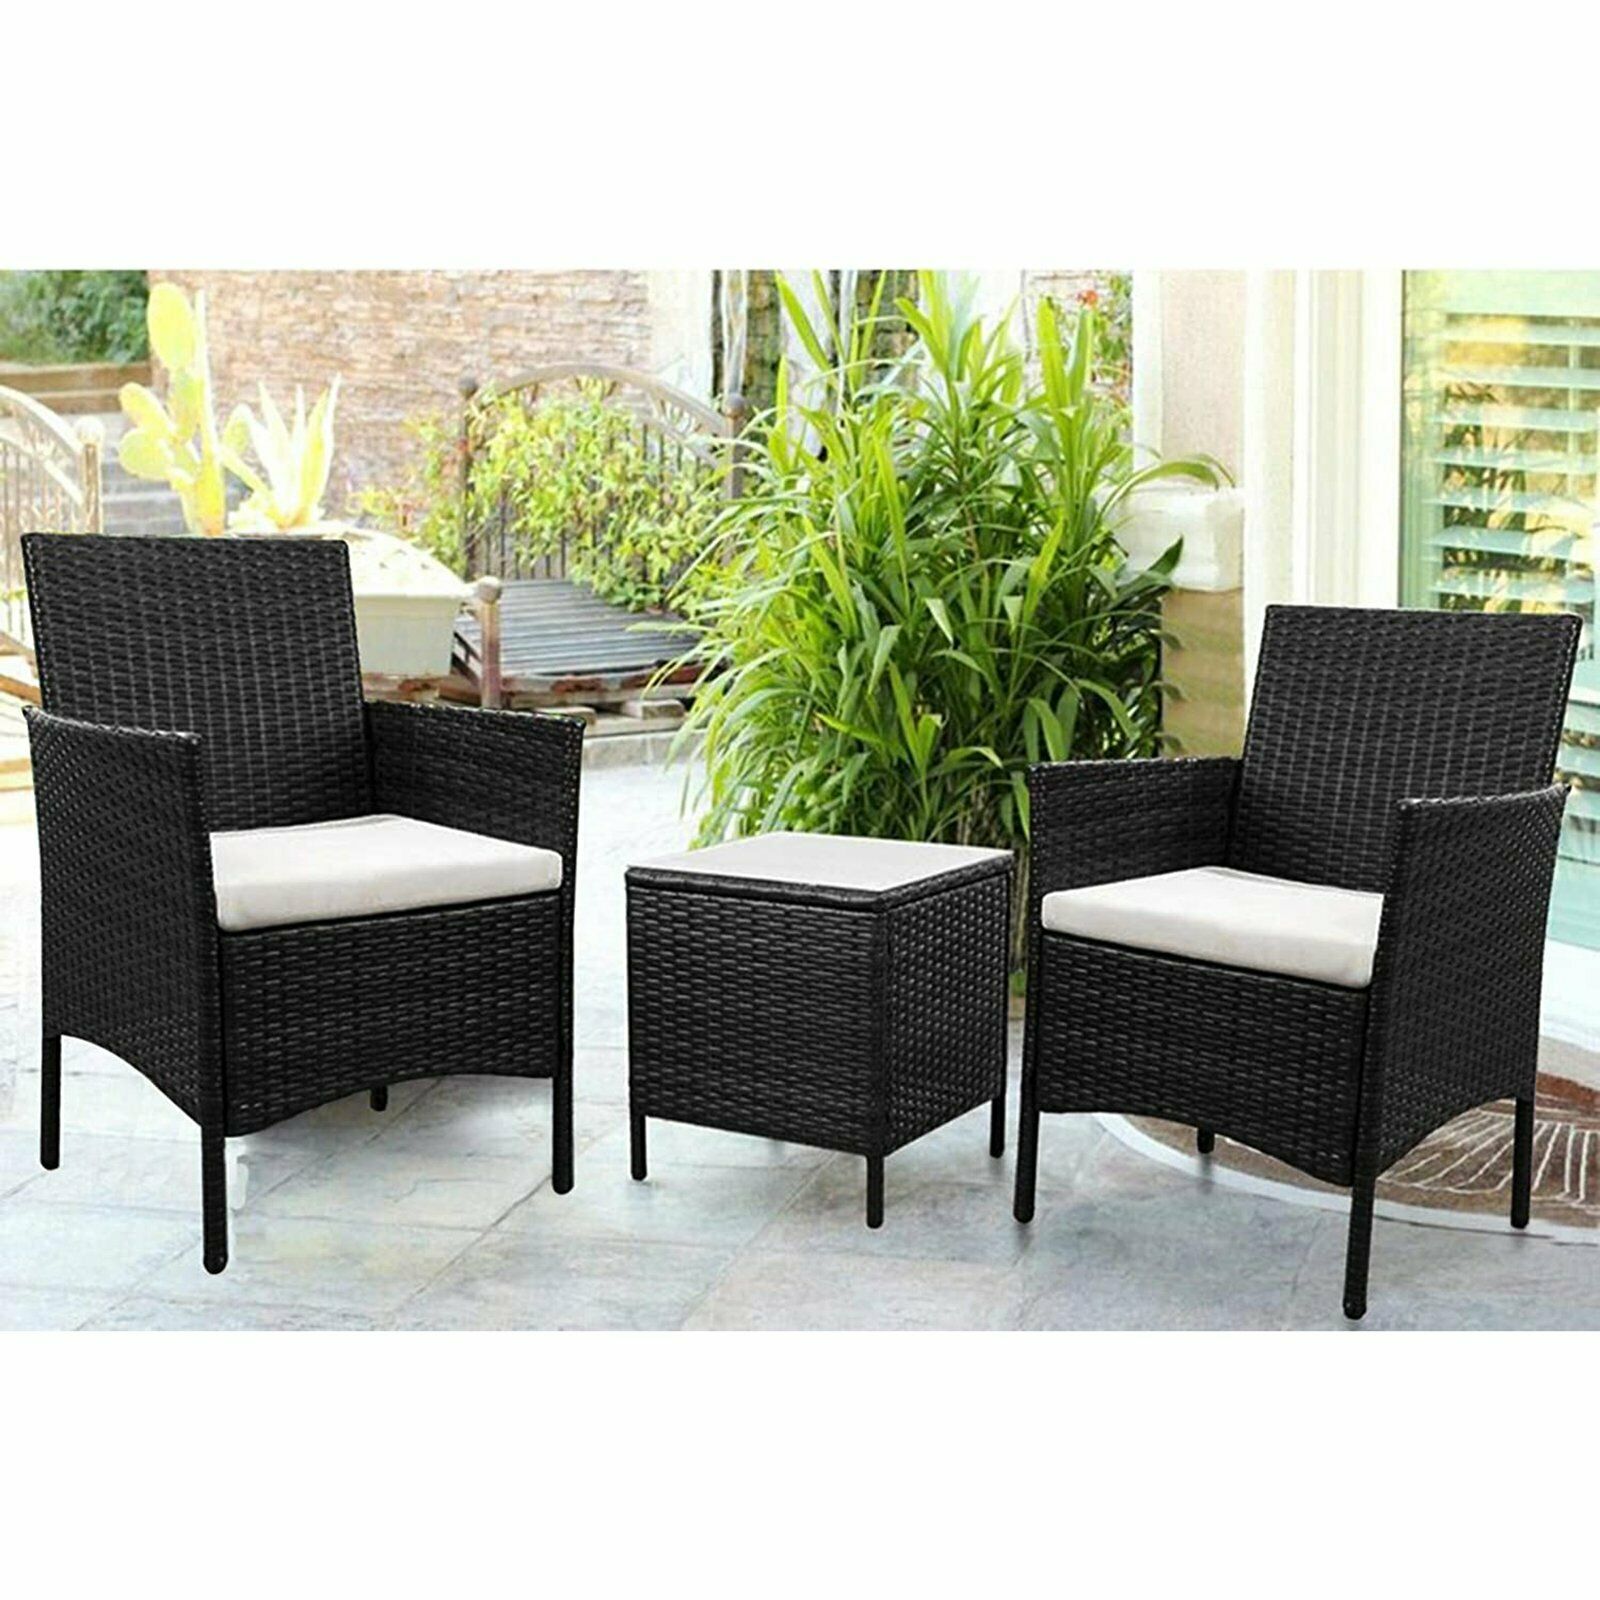 CAYNEL 3 Pieces Outdoor Patio Furniture Set